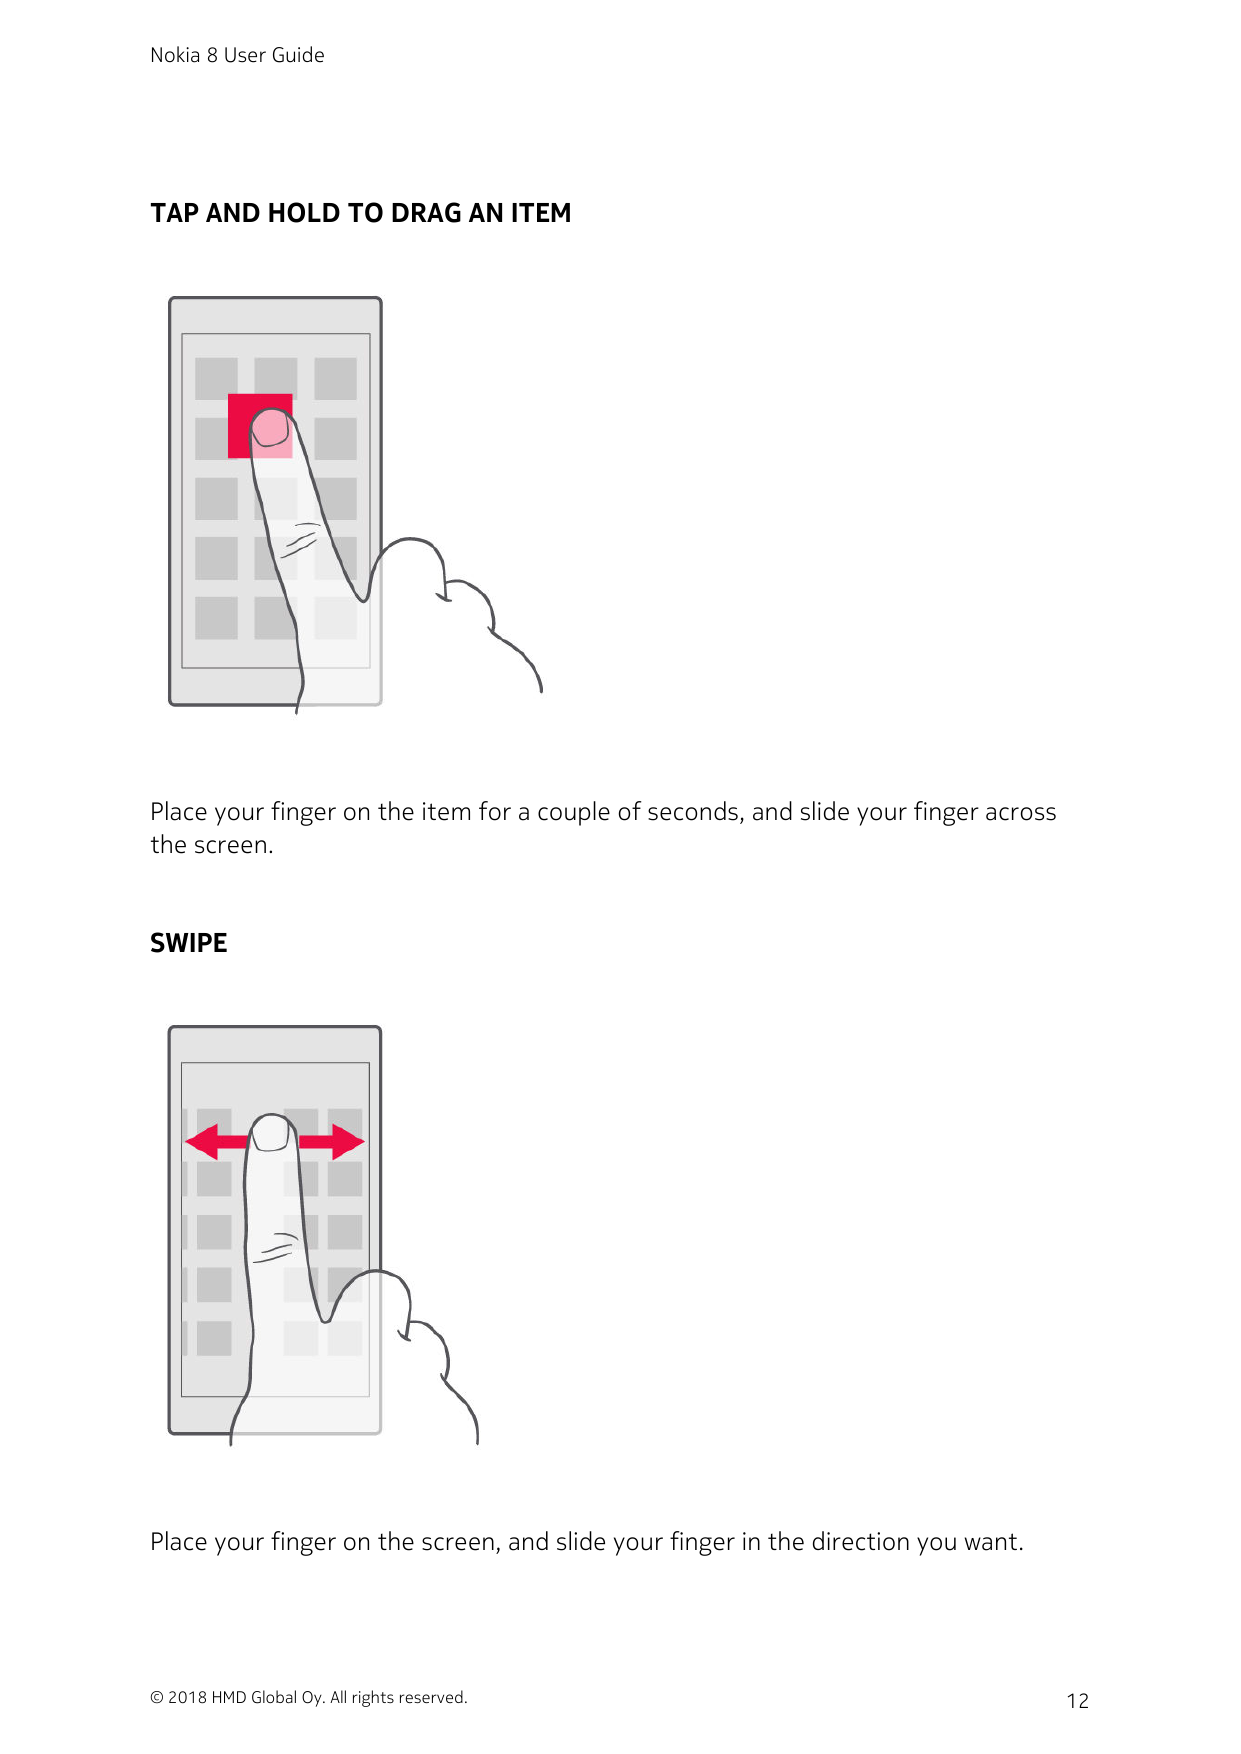 Nokia 8 User GuideTAP AND HOLD TO DRAG AN ITEMPlace your finger on the item for a couple of seconds, and slide your finger acros